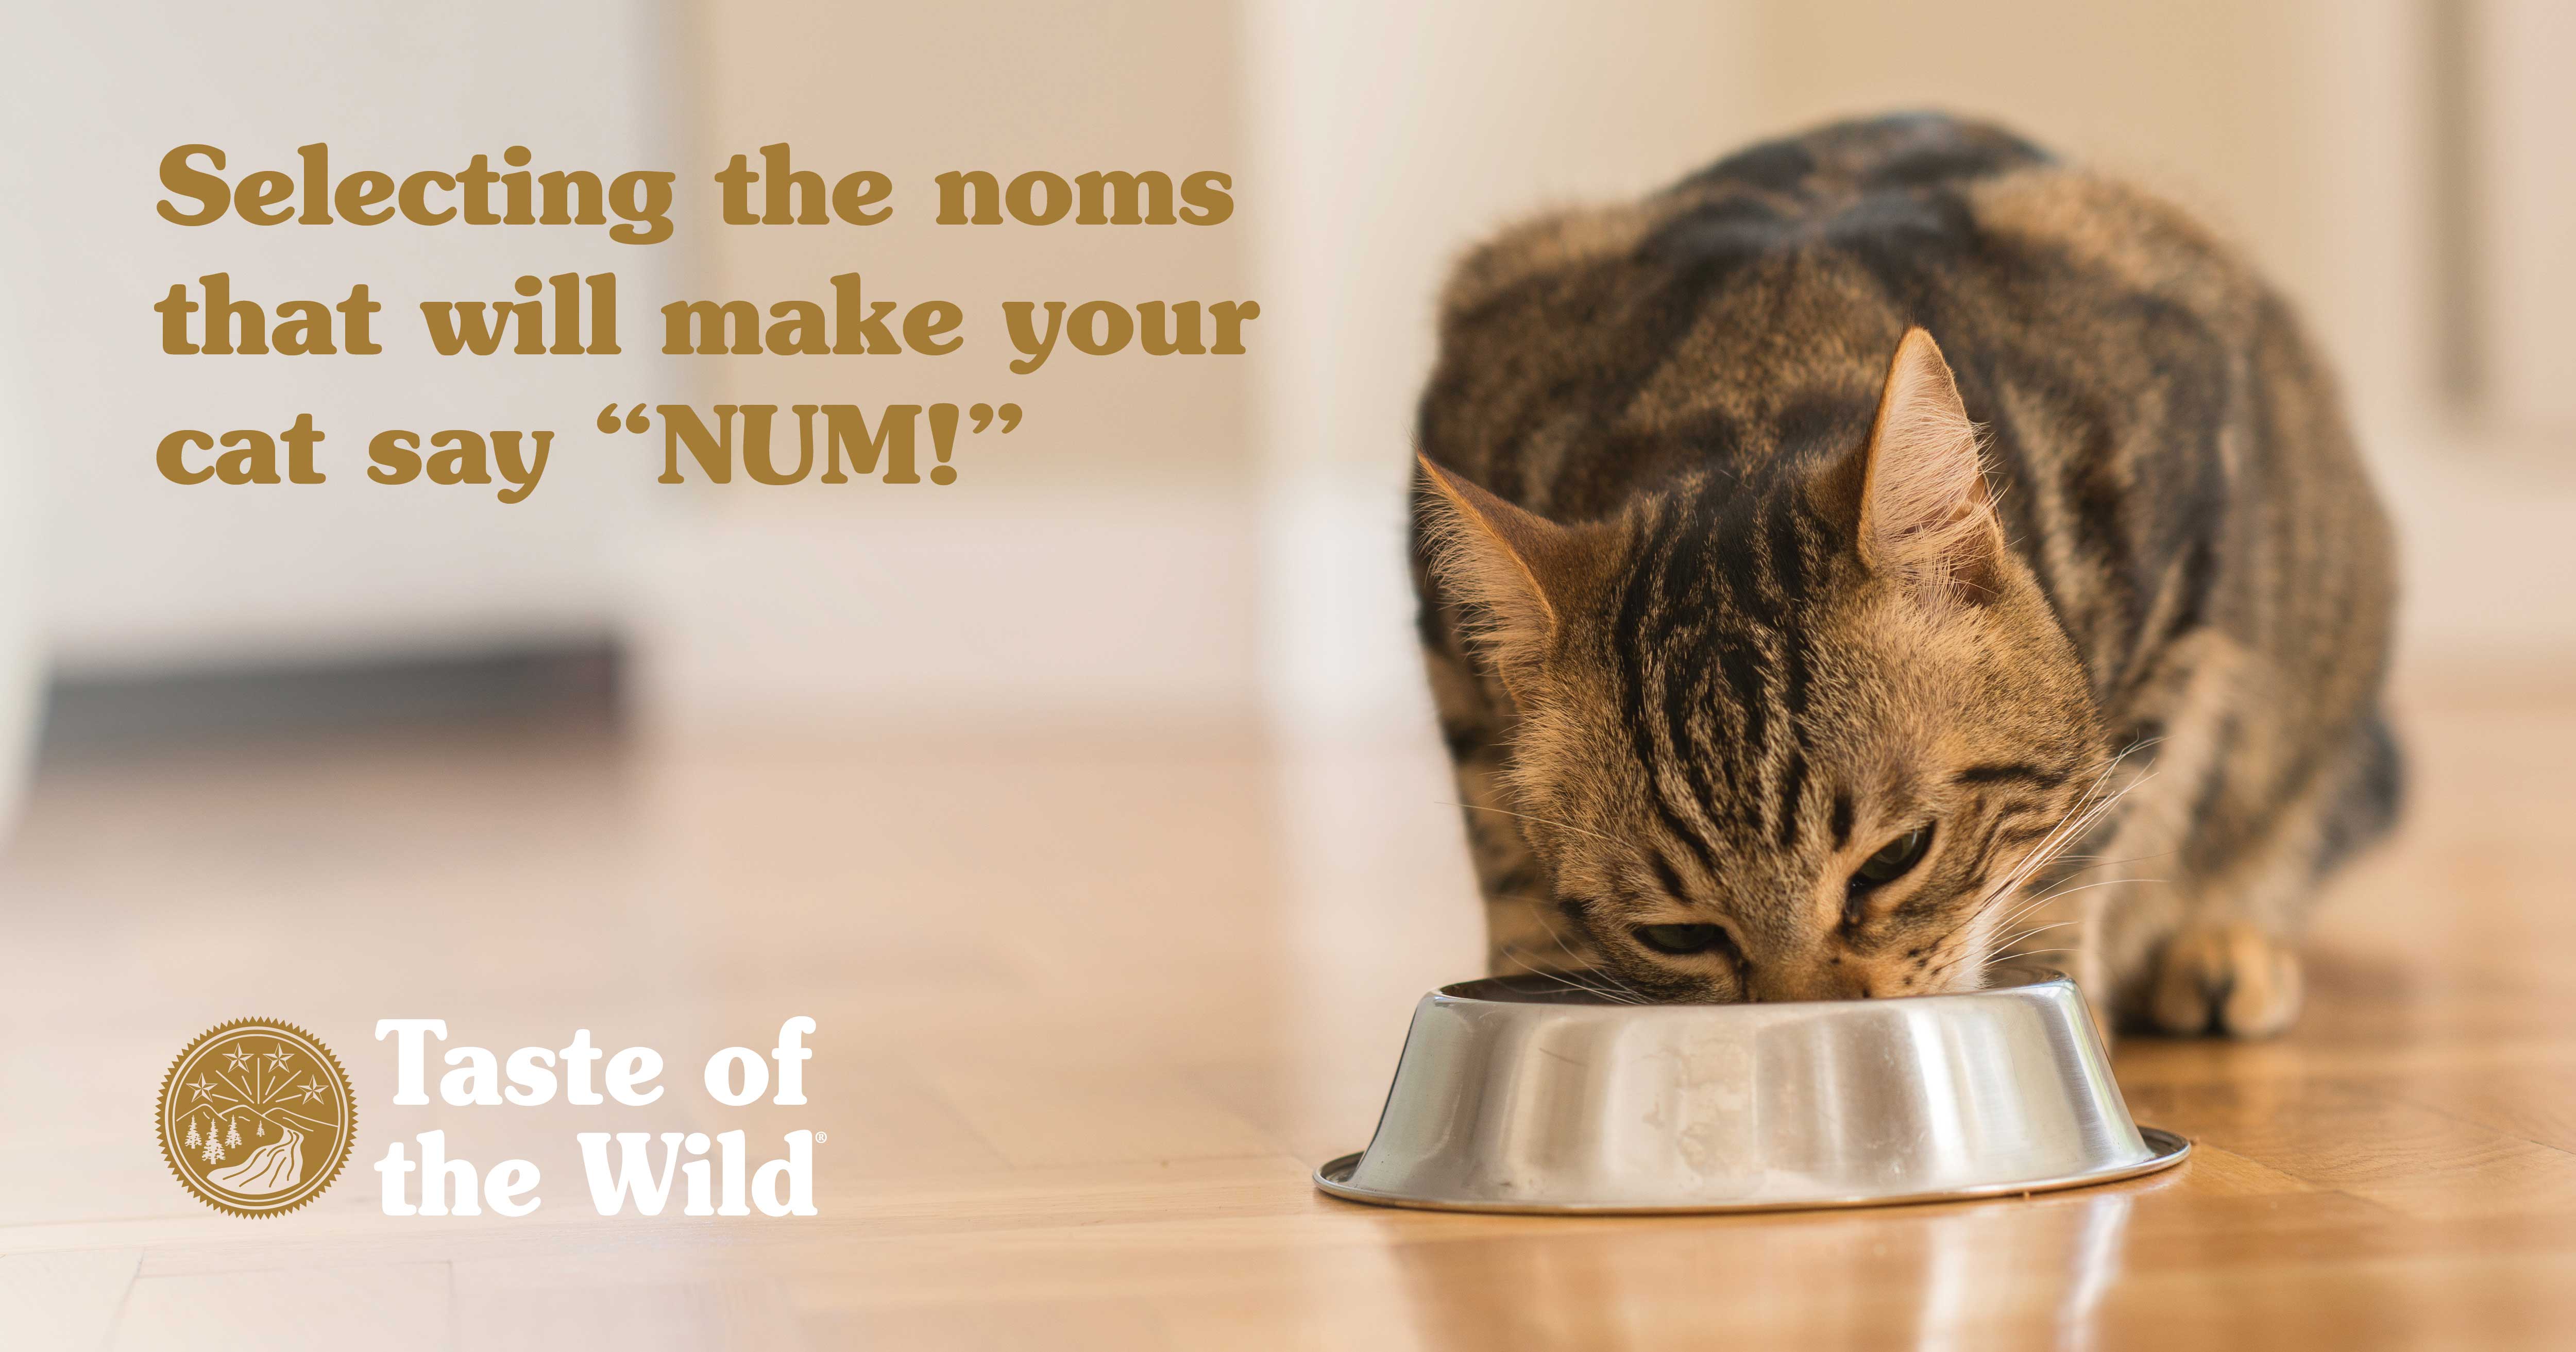 Cat Eating From a Metal Bowl in the Kitchen | Taste of the Wild Pet Food